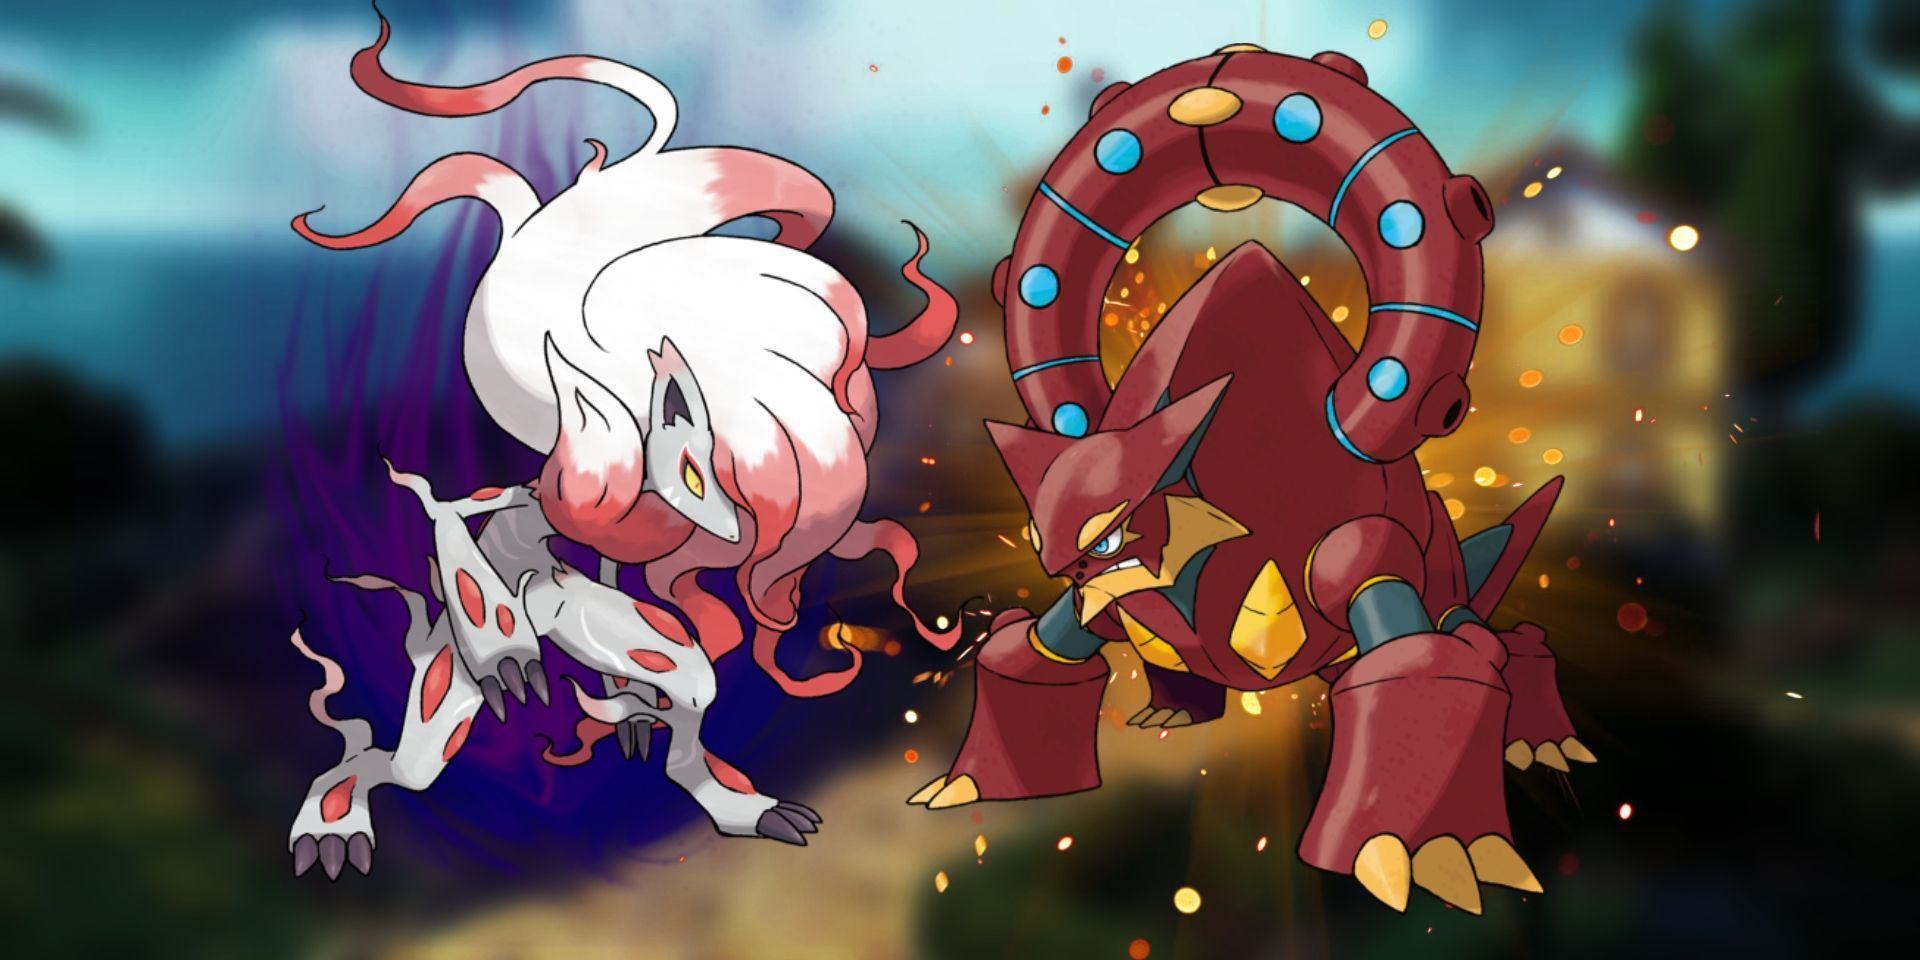 Pokemon's Zoroark and Volcanion. Zoroark has a dark energy behind it, while Volcanion has an explosion effect behind it. In the background is a blurred-out image of the Trainer's home in Paldea.